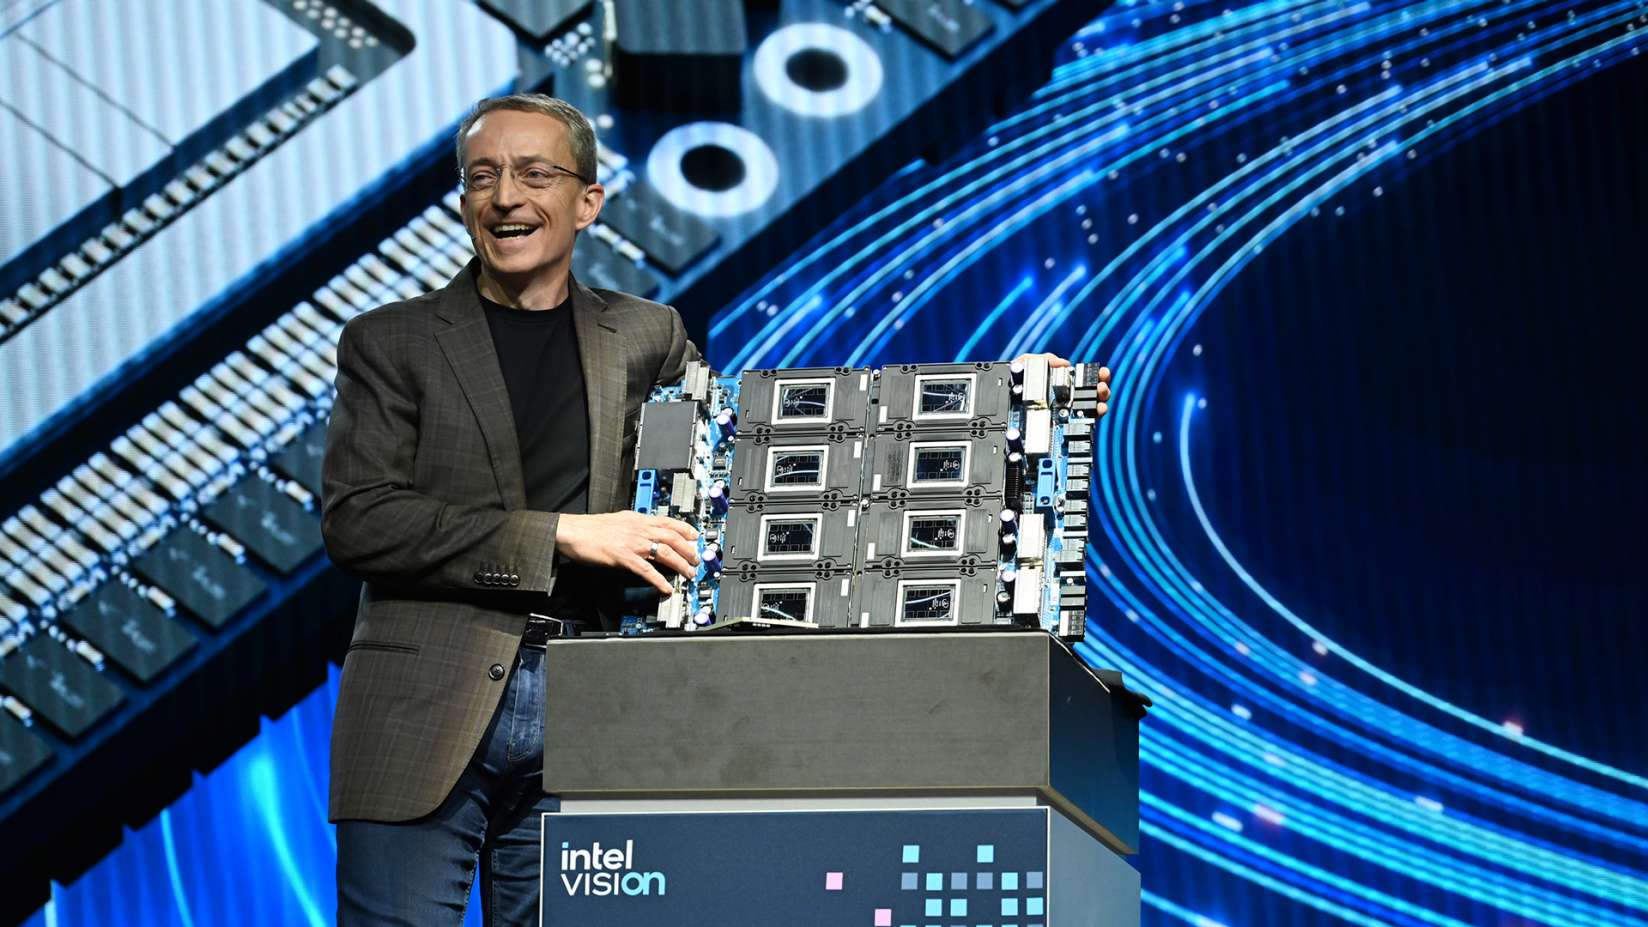 Intel is coming for NVIDIA's H100 with Gaudi 3 release